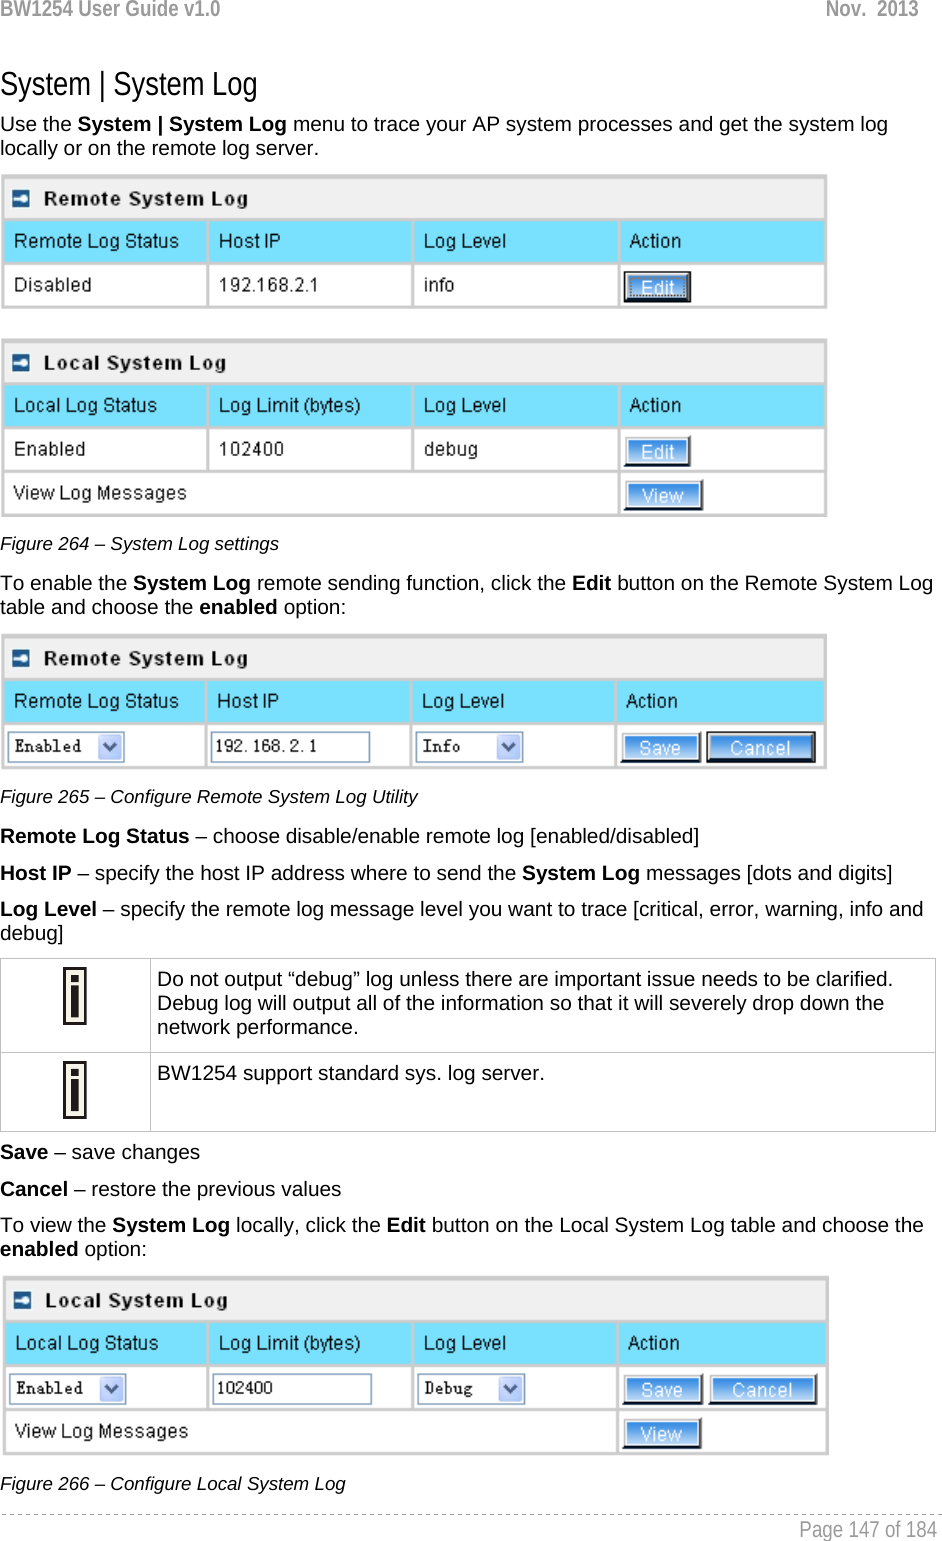 BW1254 User Guide v1.0  Nov.  2013     Page 147 of 184   System | System Log Use the System | System Log menu to trace your AP system processes and get the system log locally or on the remote log server.   Figure 264 – System Log settings To enable the System Log remote sending function, click the Edit button on the Remote System Log table and choose the enabled option:  Figure 265 – Configure Remote System Log Utility Remote Log Status – choose disable/enable remote log [enabled/disabled] Host IP – specify the host IP address where to send the System Log messages [dots and digits] Log Level – specify the remote log message level you want to trace [critical, error, warning, info and debug]  Do not output “debug” log unless there are important issue needs to be clarified. Debug log will output all of the information so that it will severely drop down the network performance.  BW1254 support standard sys. log server. Save – save changes Cancel – restore the previous values To view the System Log locally, click the Edit button on the Local System Log table and choose the enabled option:  Figure 266 – Configure Local System Log 